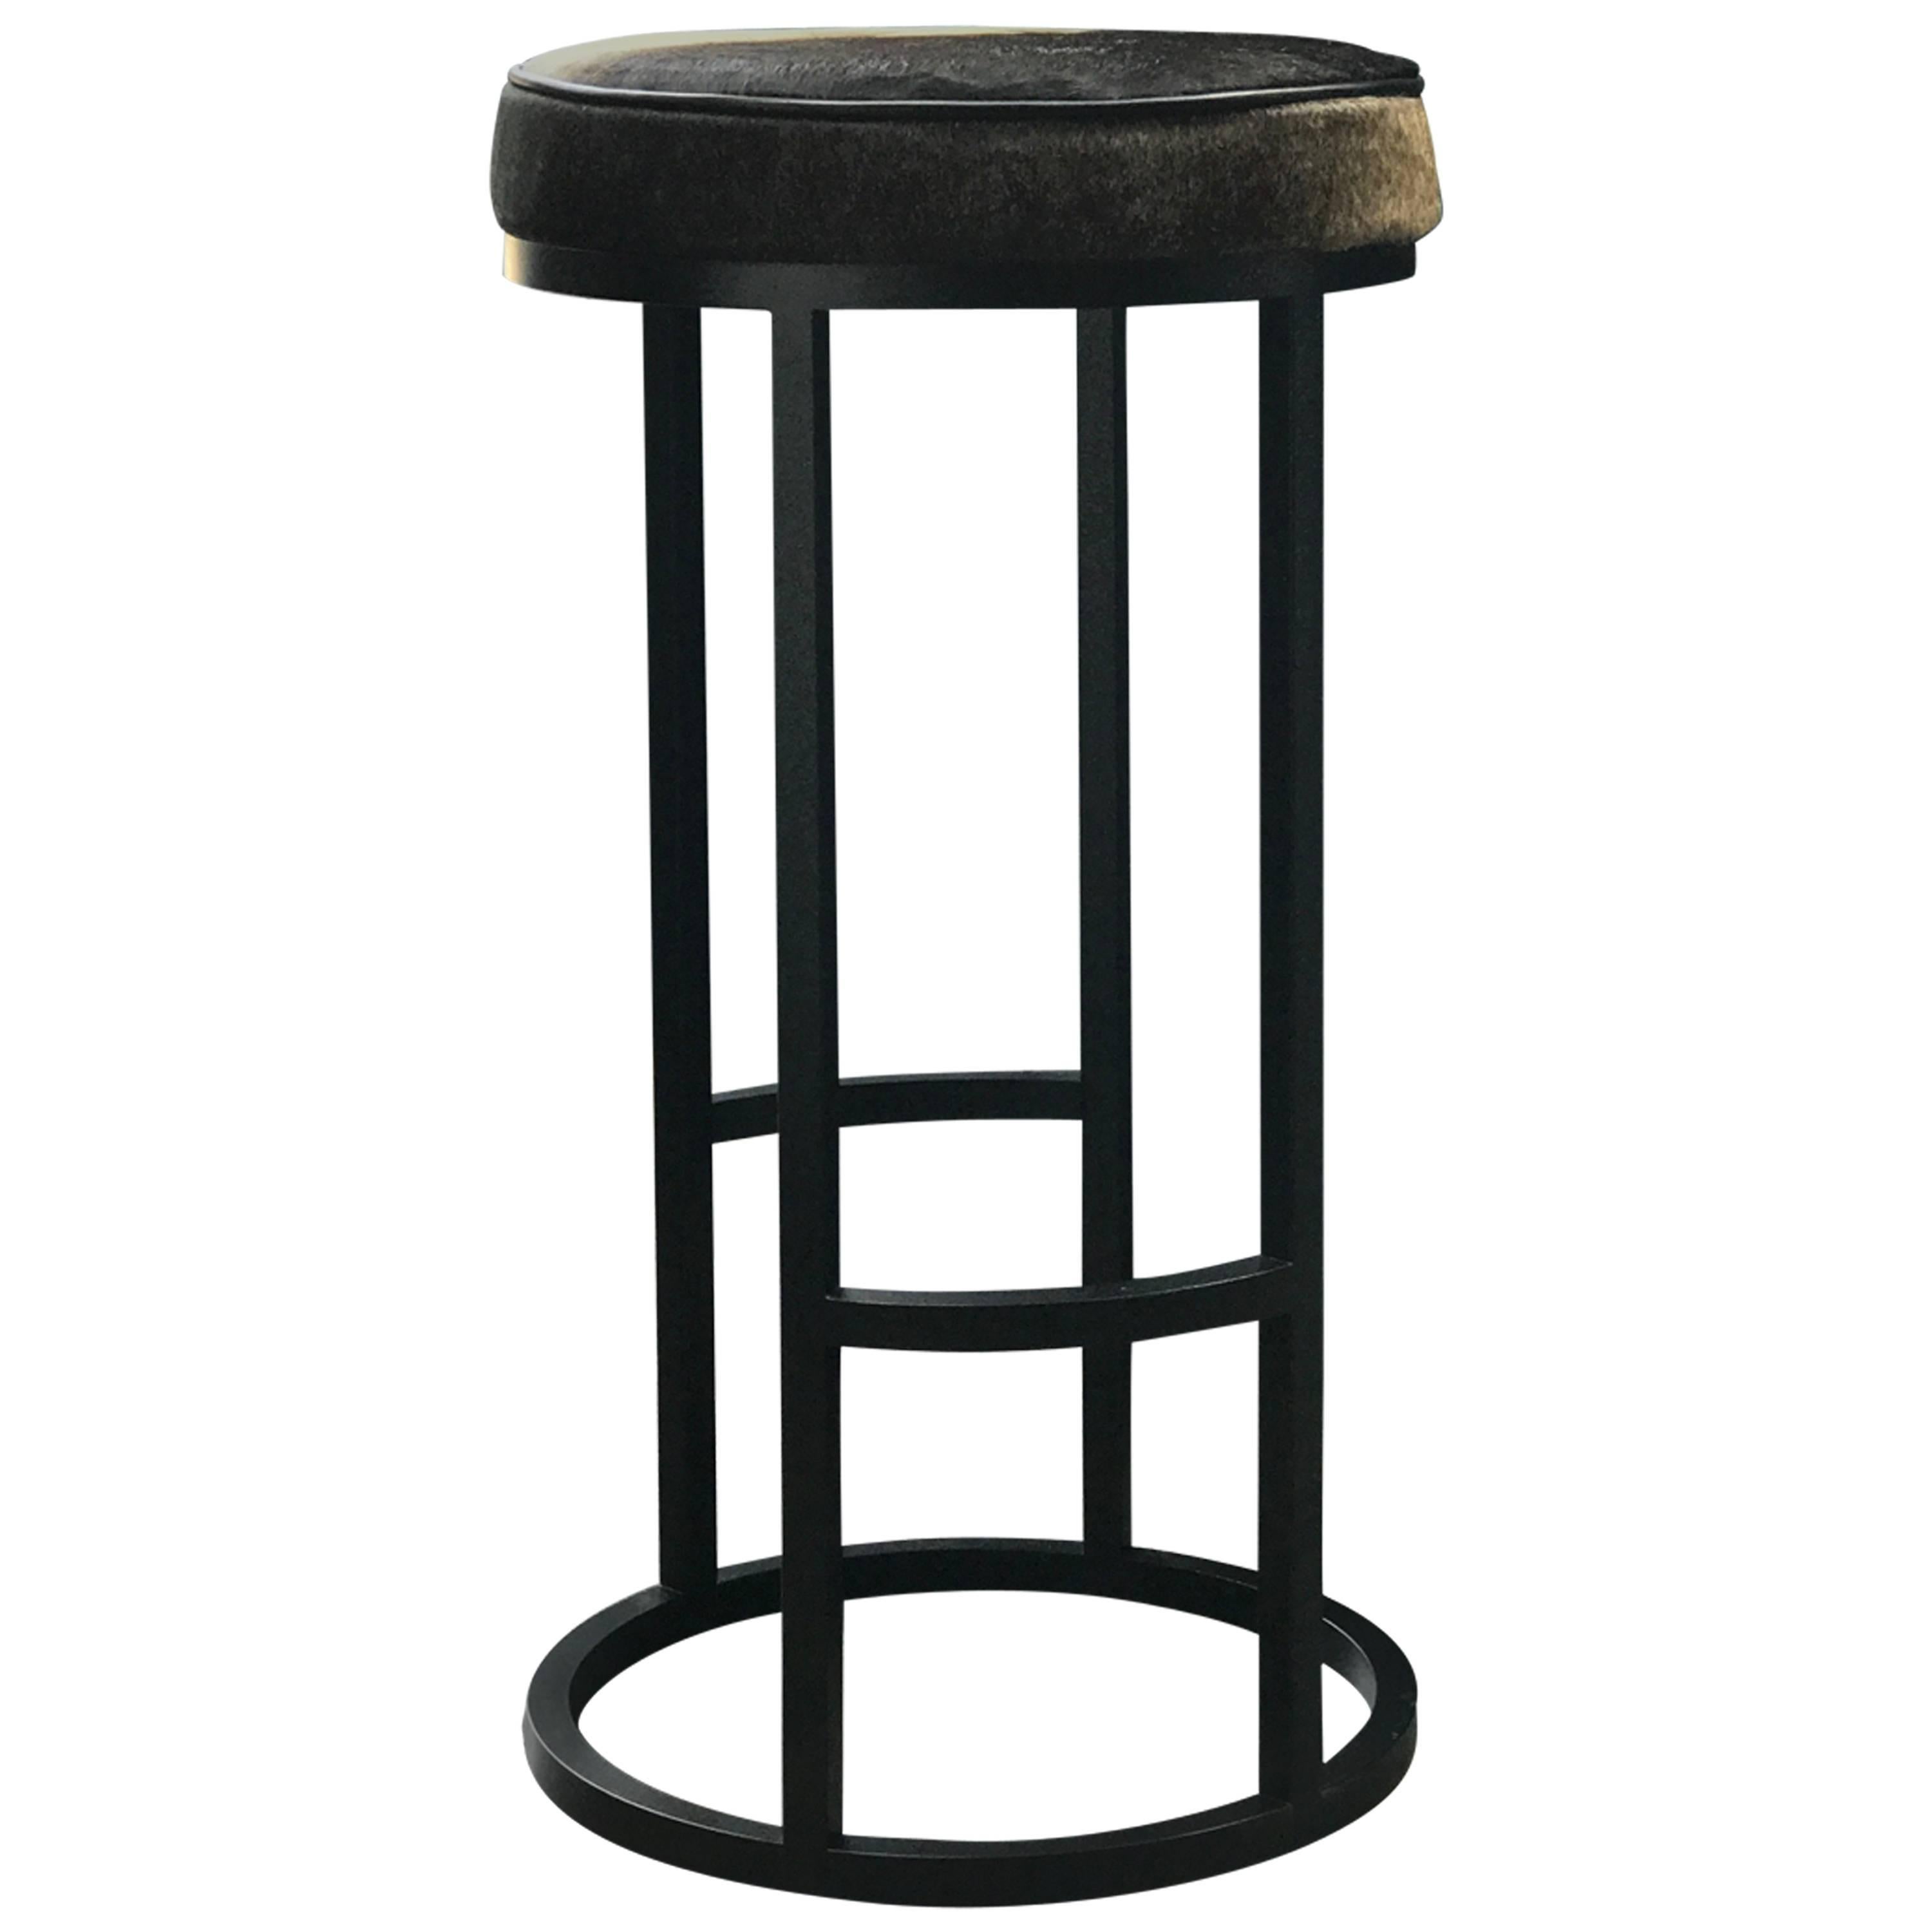 Diana Bar Stool Circular in Steel Powder-Coated and Leather